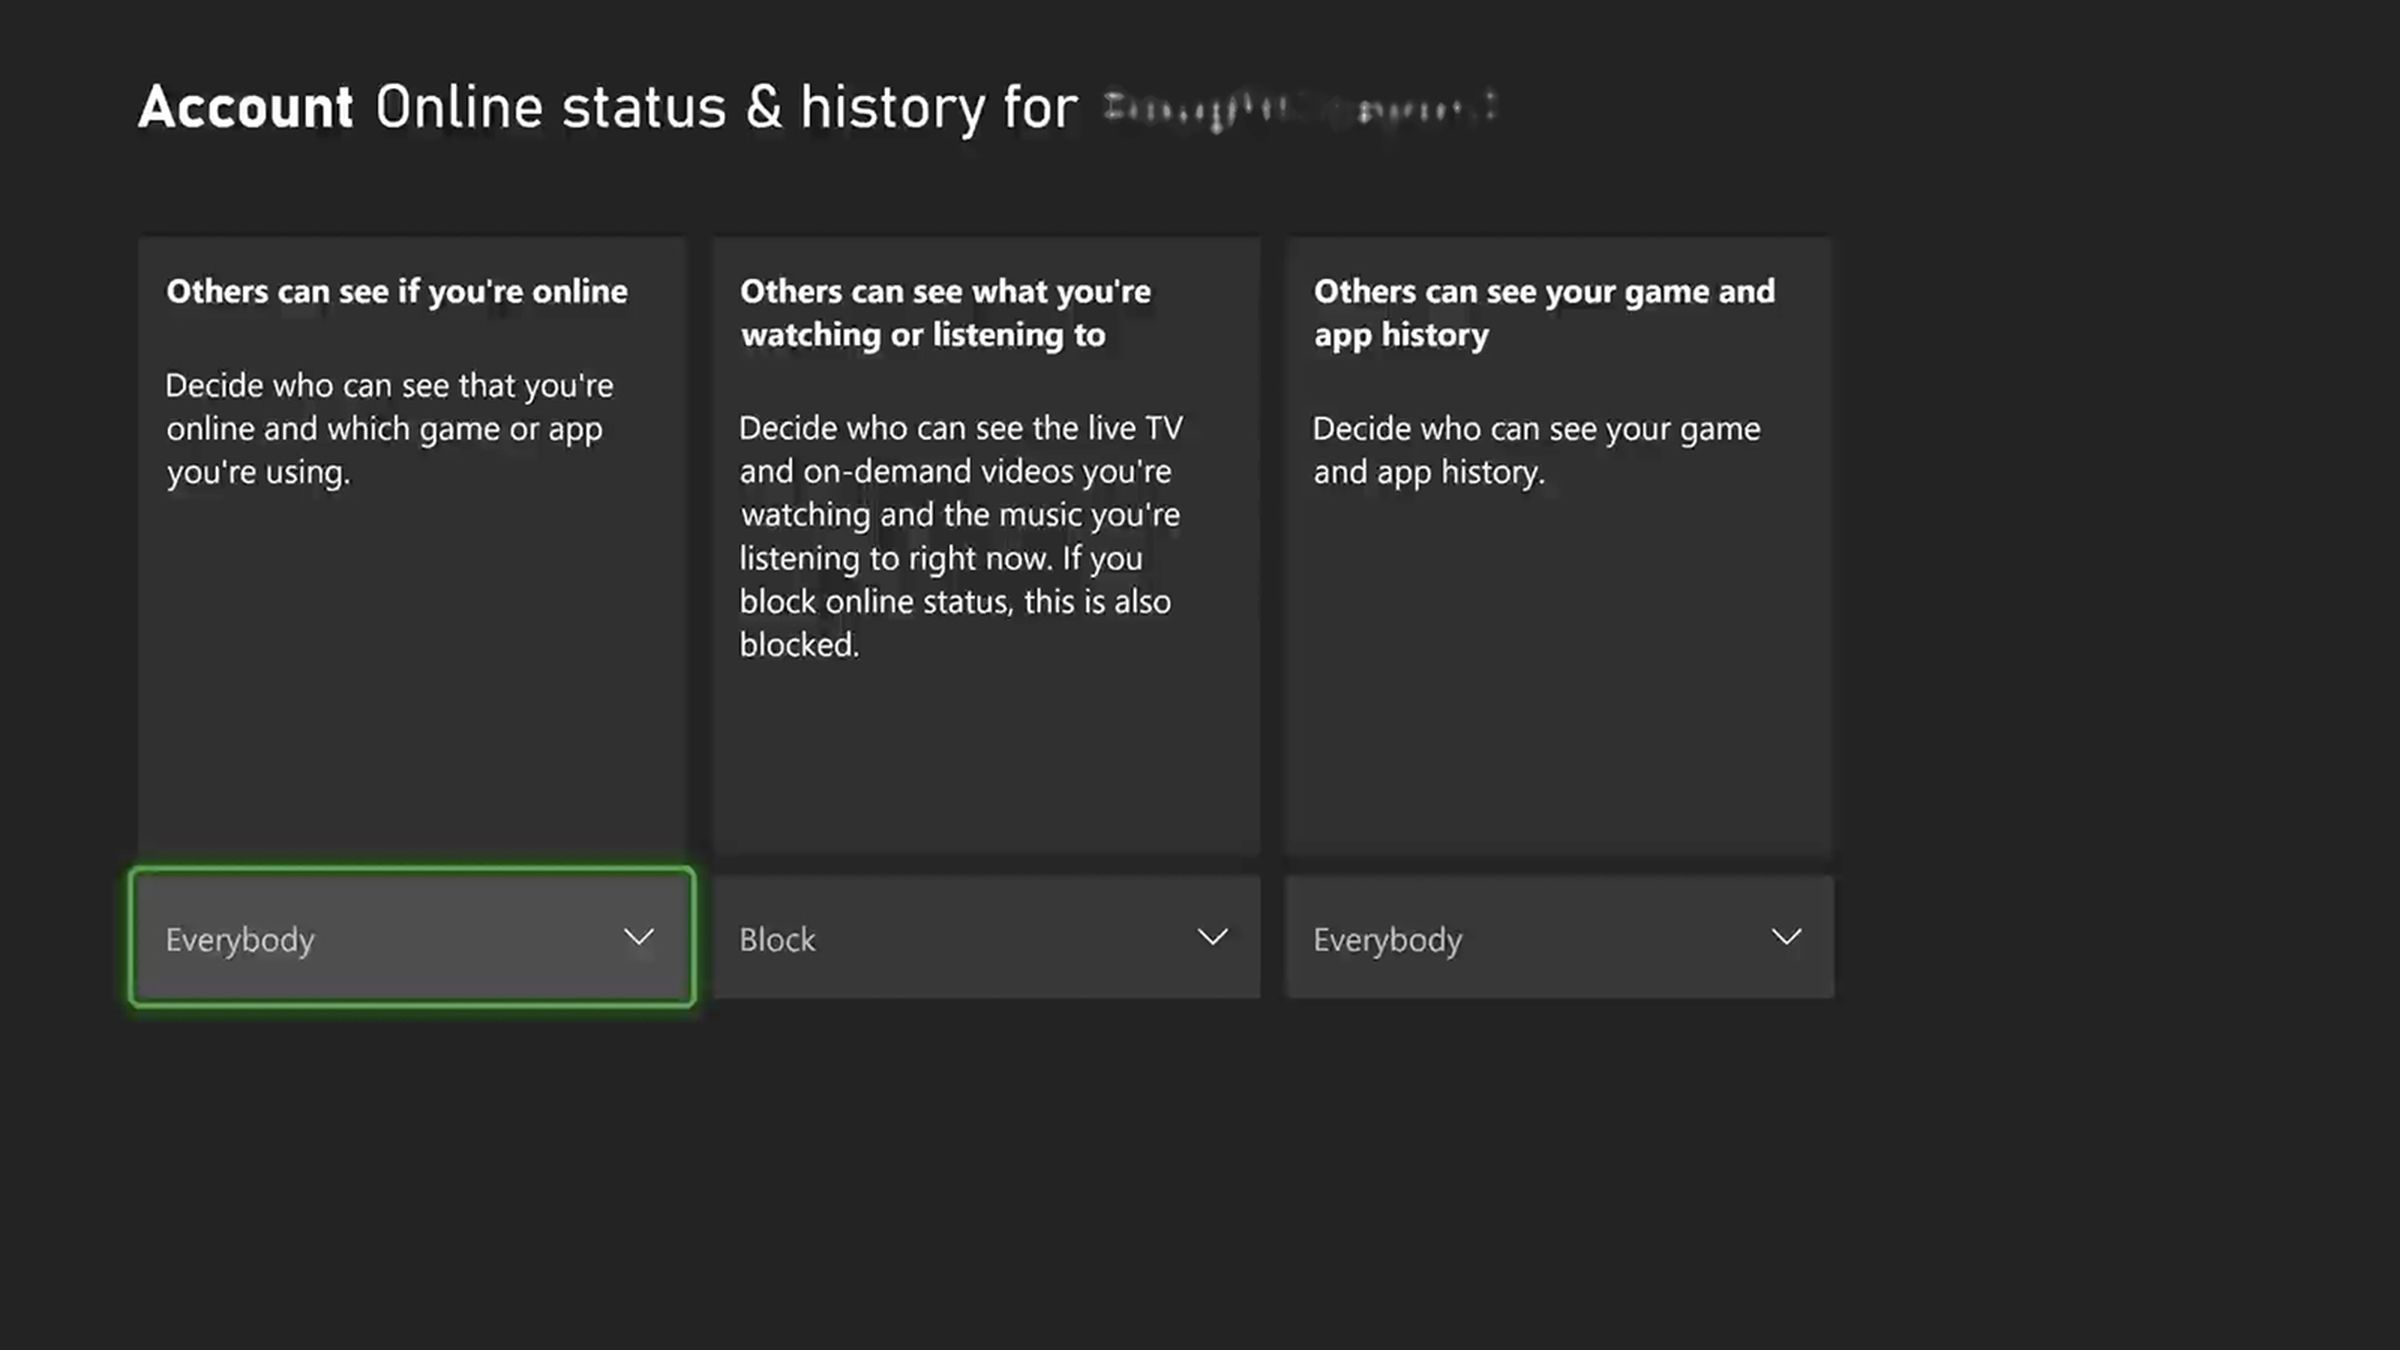 Page with “Account Online status &amp; history for...” on top, and three boxes headed “Others can see if you’re online” “Others can see what you’re watching or listening to” and “Others can see your game and app history.”